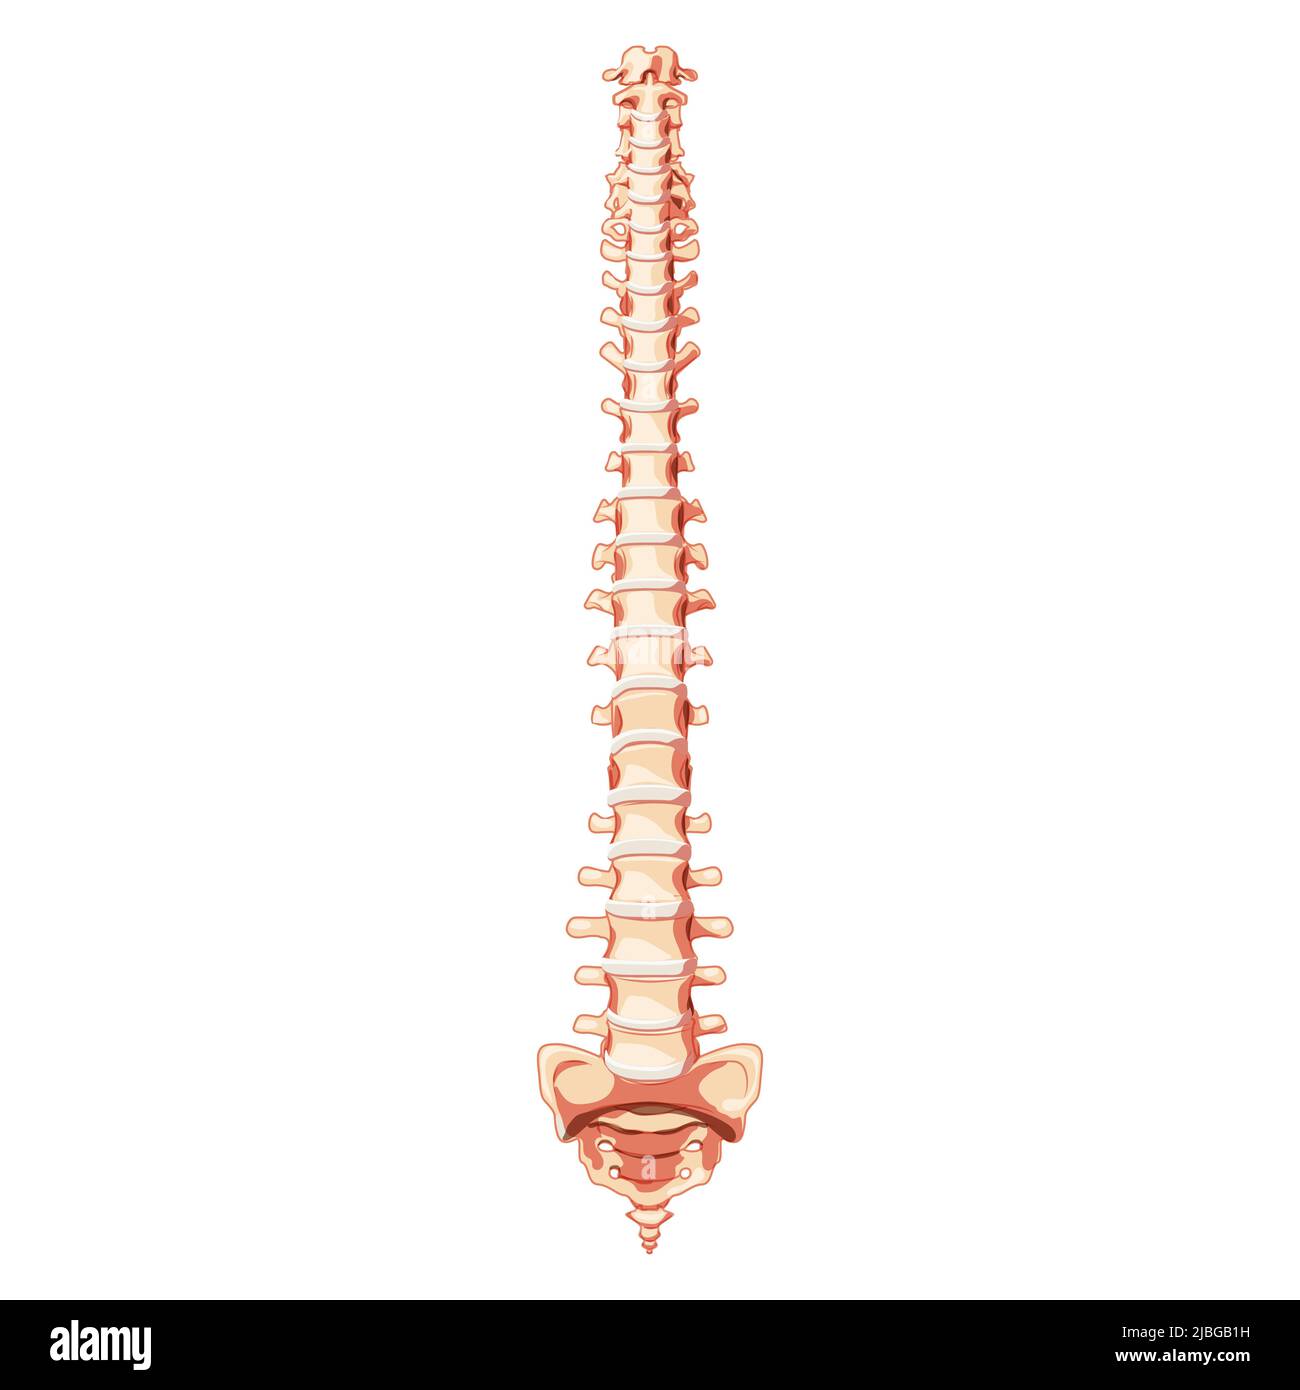 The human vertebral column spine anatomy front Anterior ventral view, with Intervertebral disc. Vector flat realistic concept illustration in natural colors, spine isolated on white background. Stock Vector